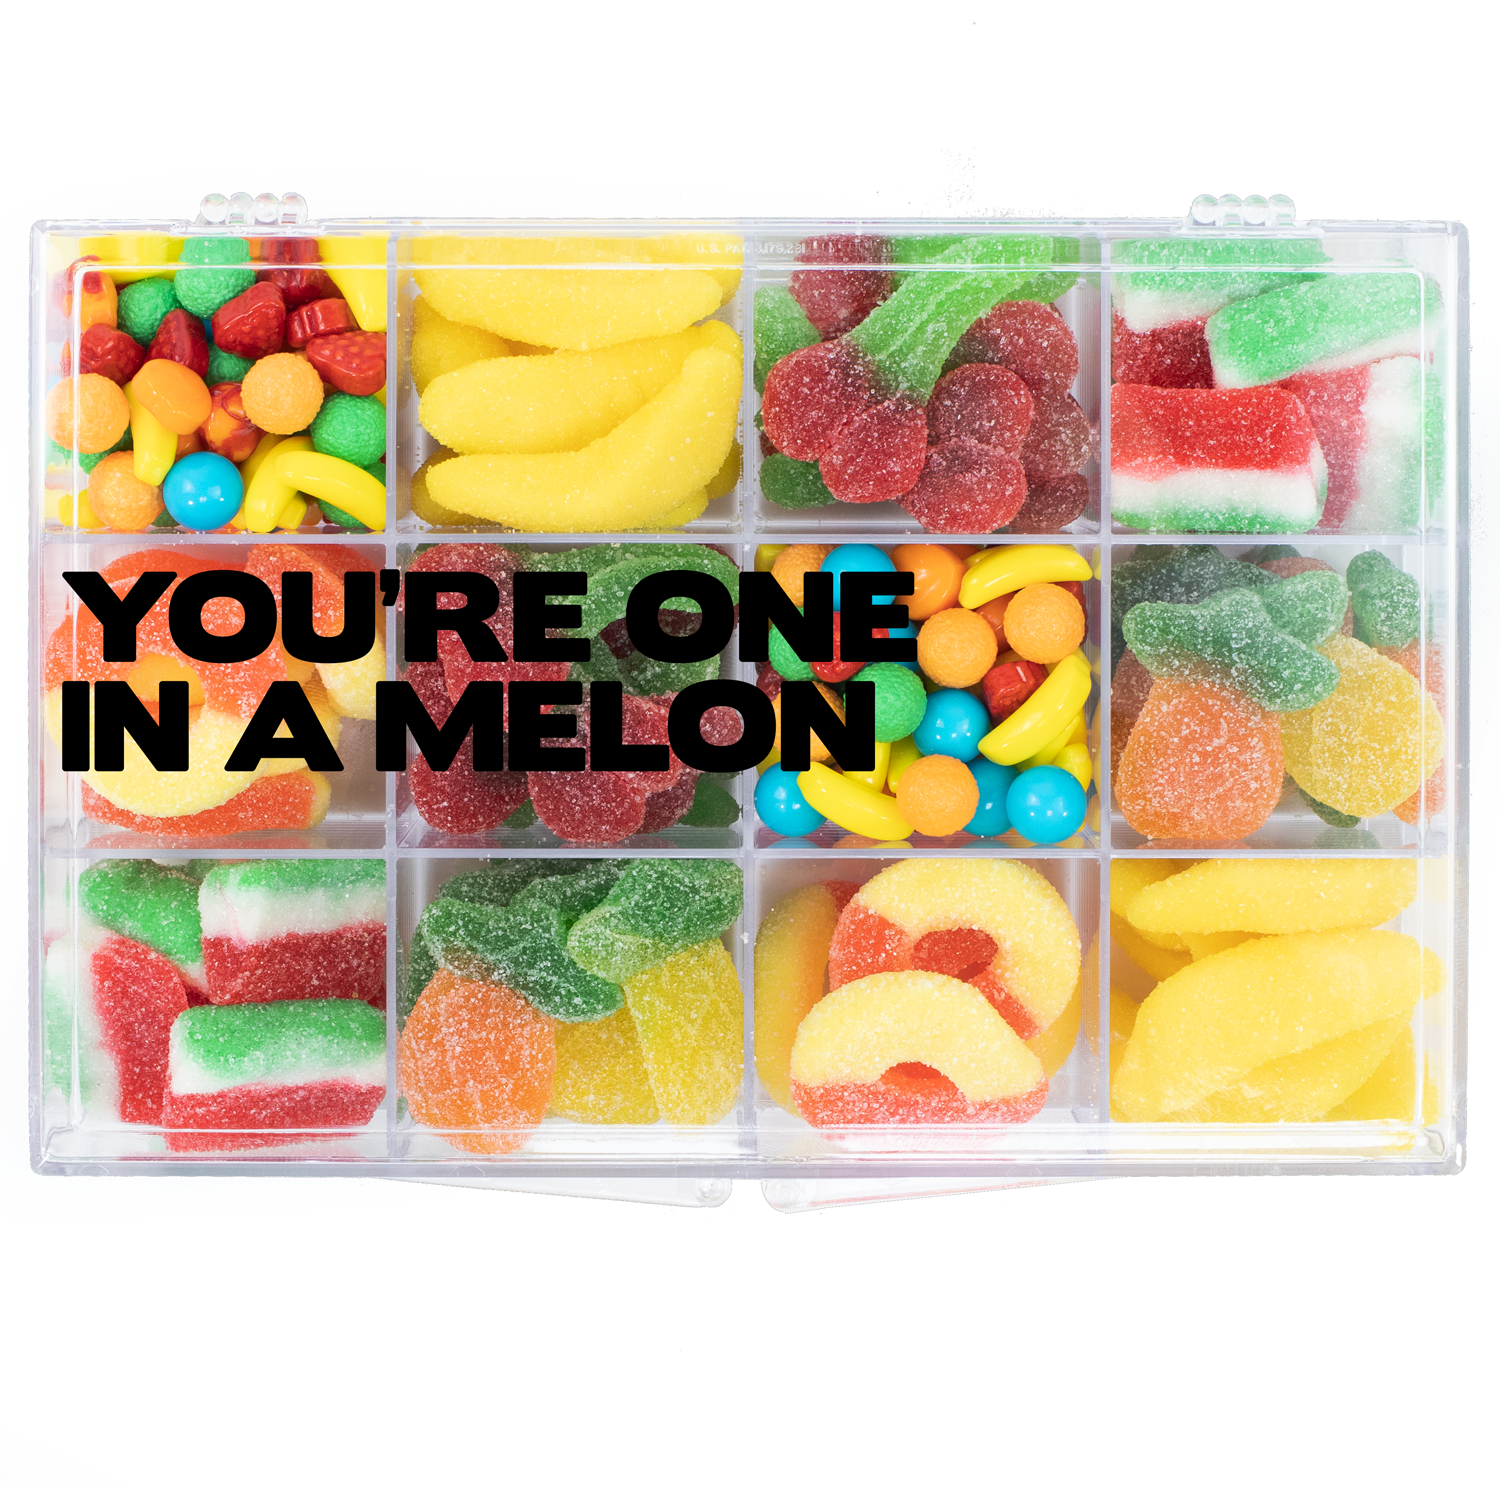 Fruit Salad Snackle Box - BOOM Candy